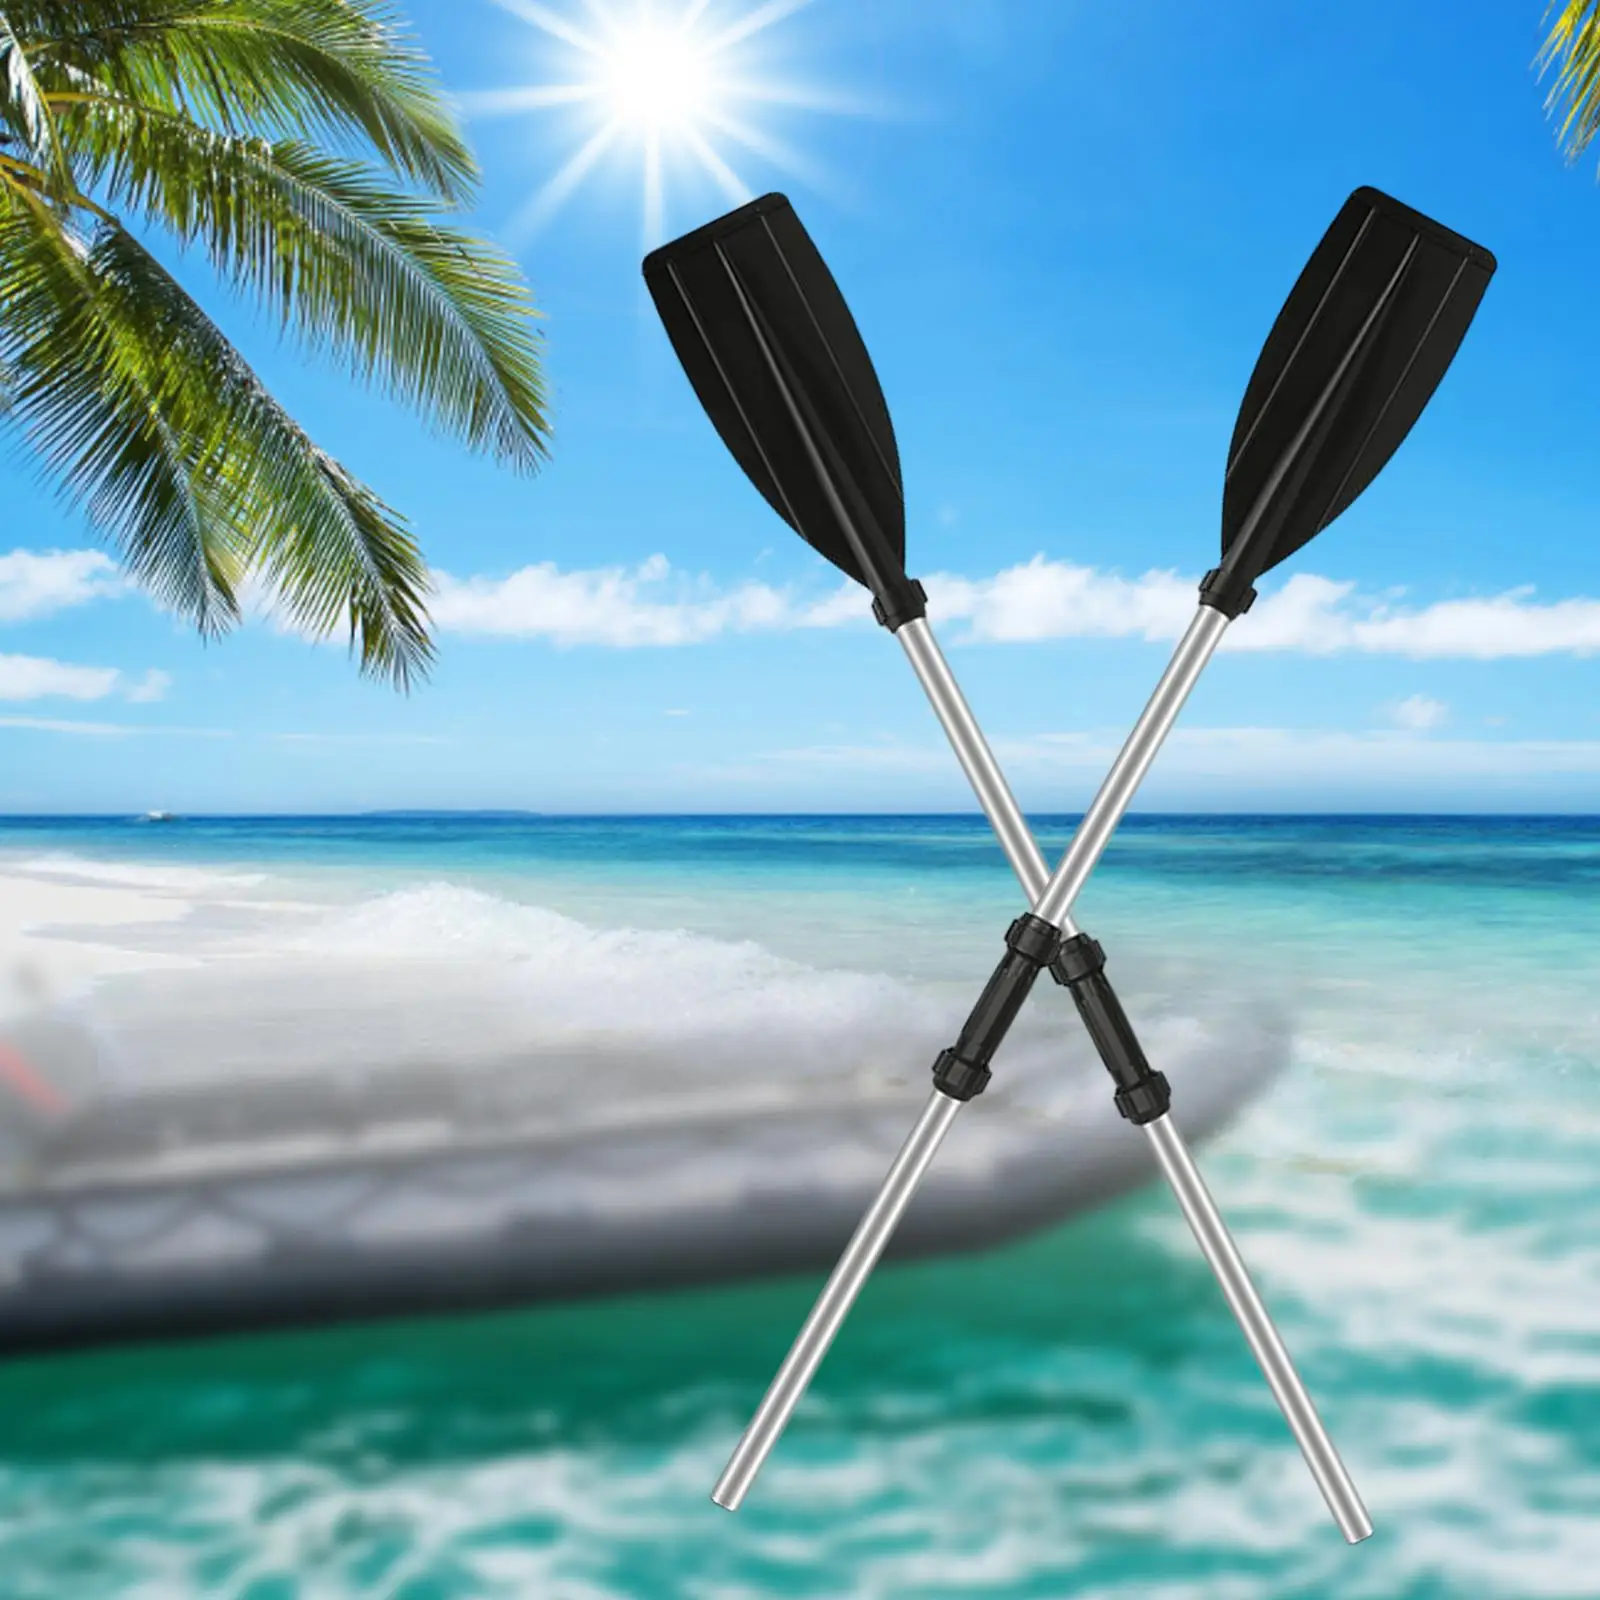 Universal Kayak Boat Rafting Paddle Aluminium Alloy Wear Resistant Lightweight Stand up Paddle Board for Surfing Kayak Fitting